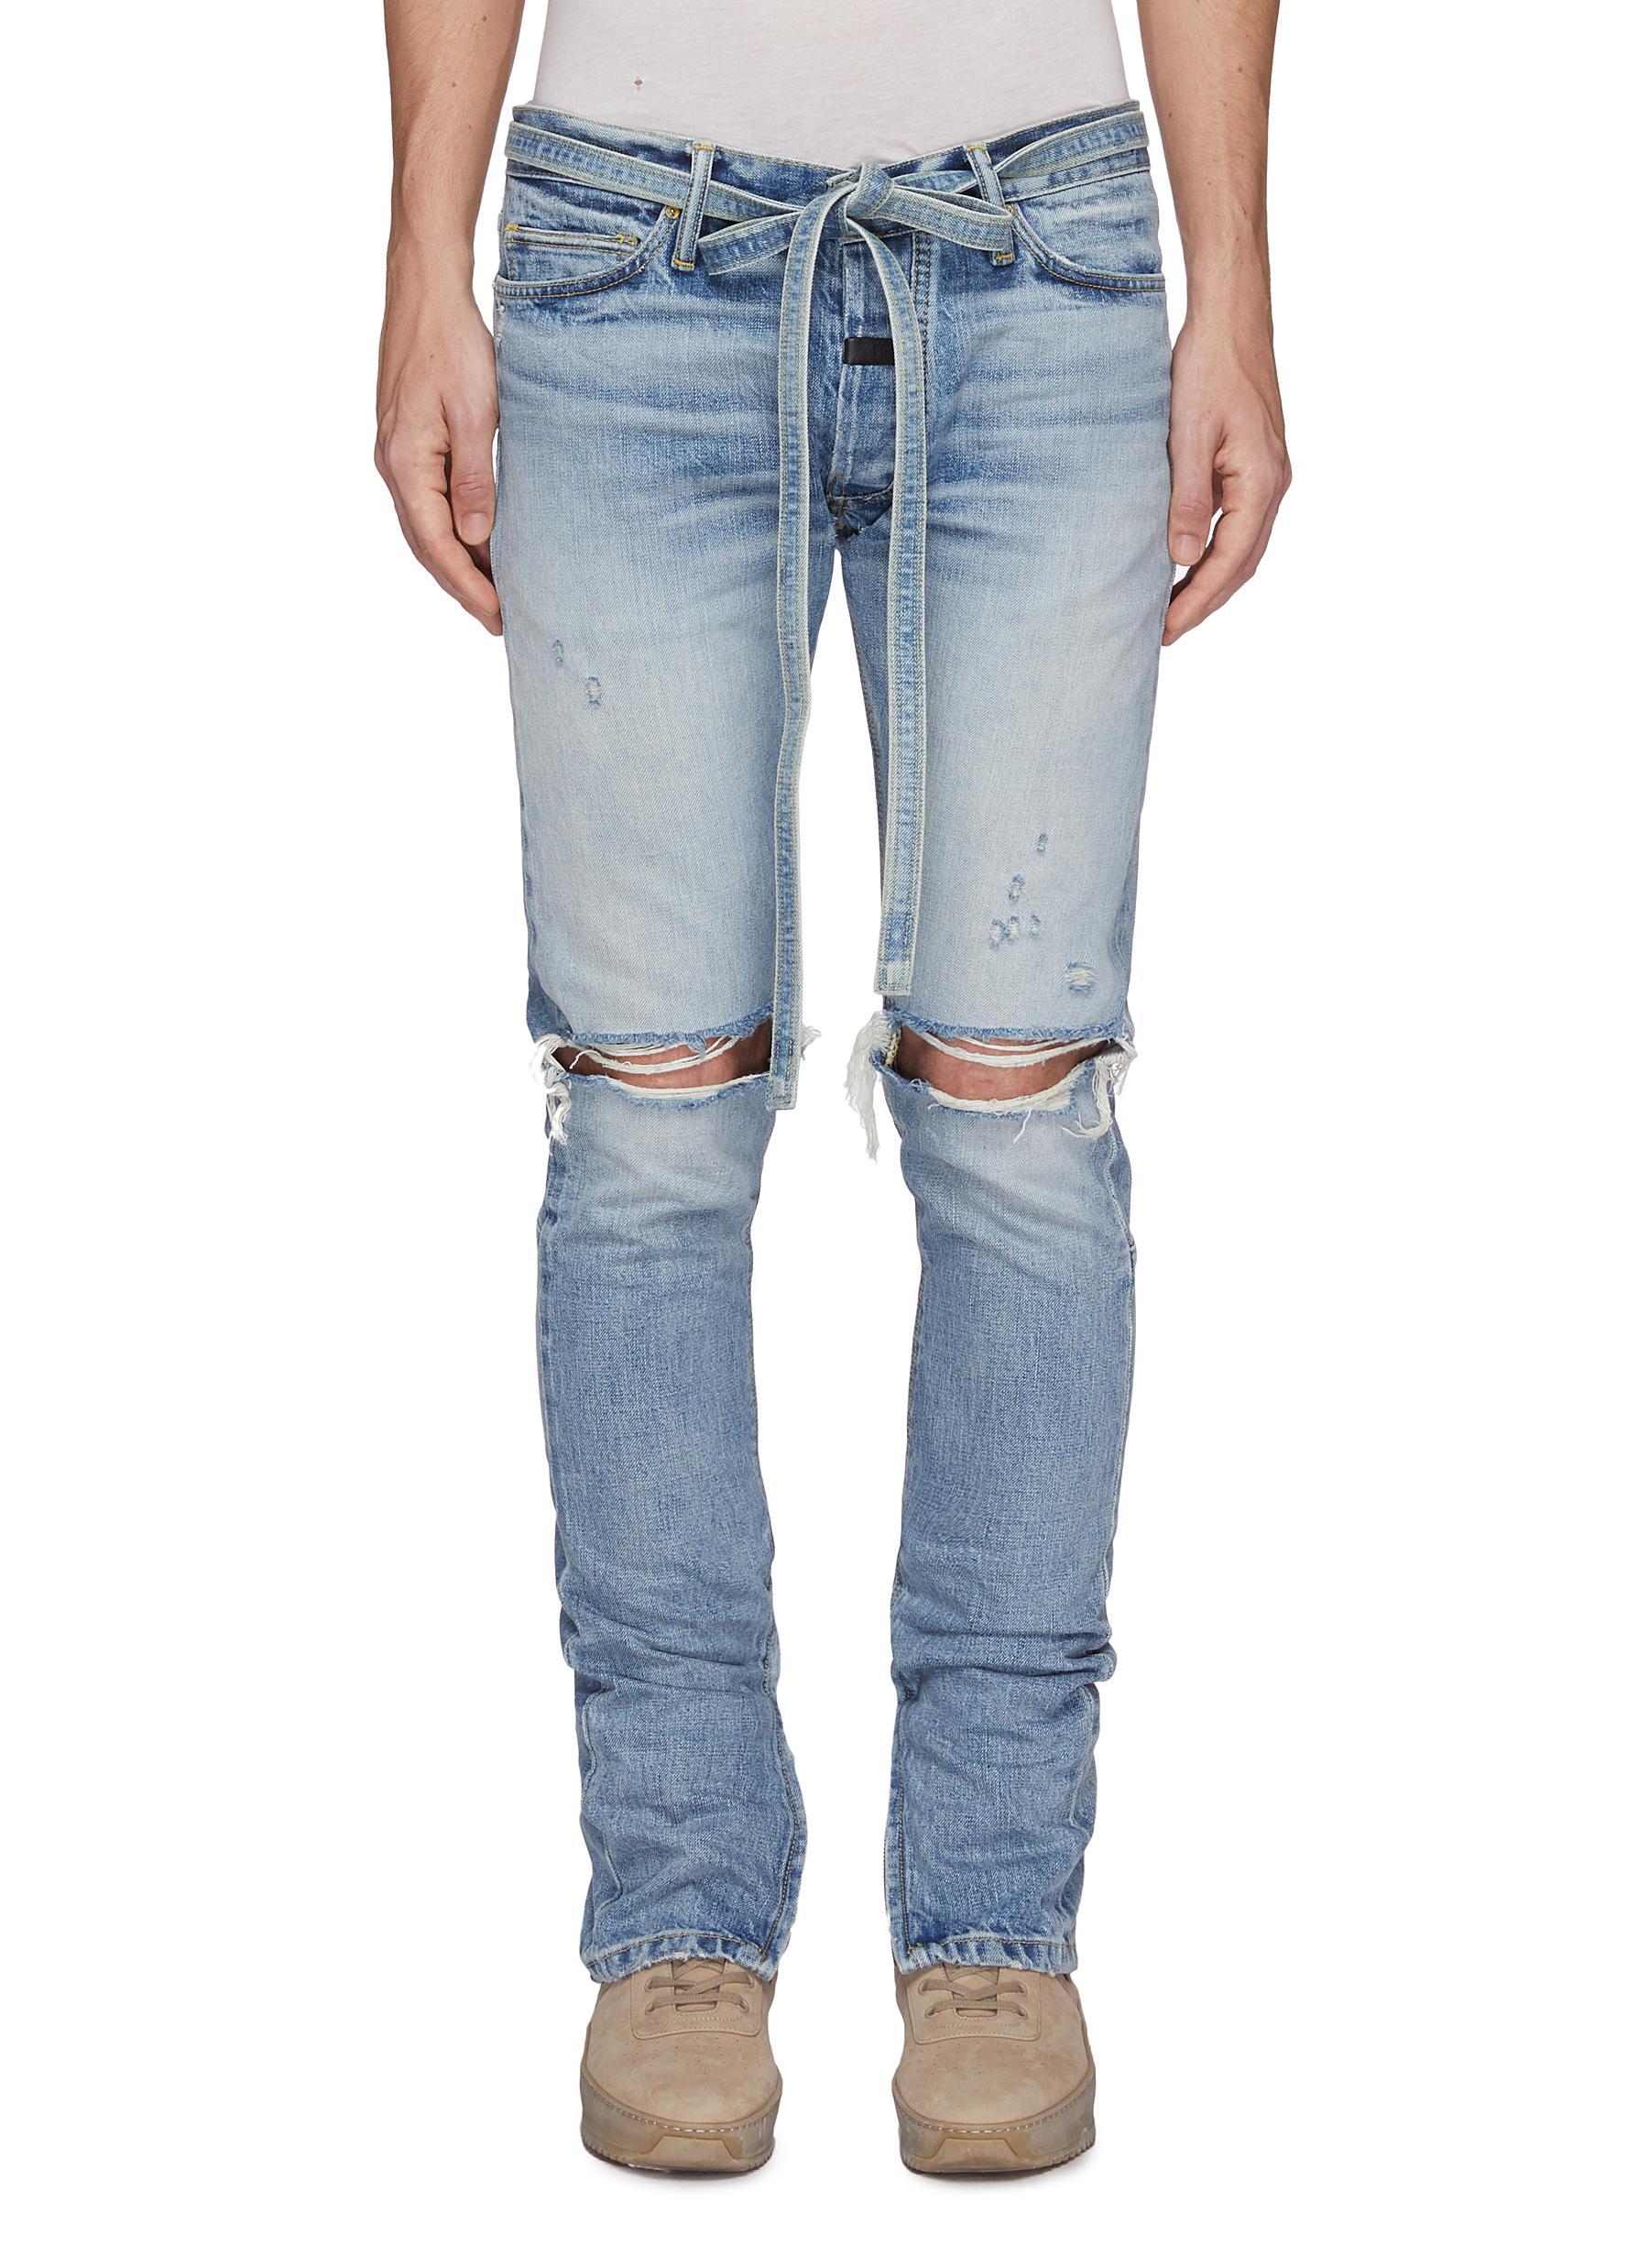 Fear Of God Denim Belted Zip Cuff Ripped Skinny Jeans in Blue for Men - Lyst